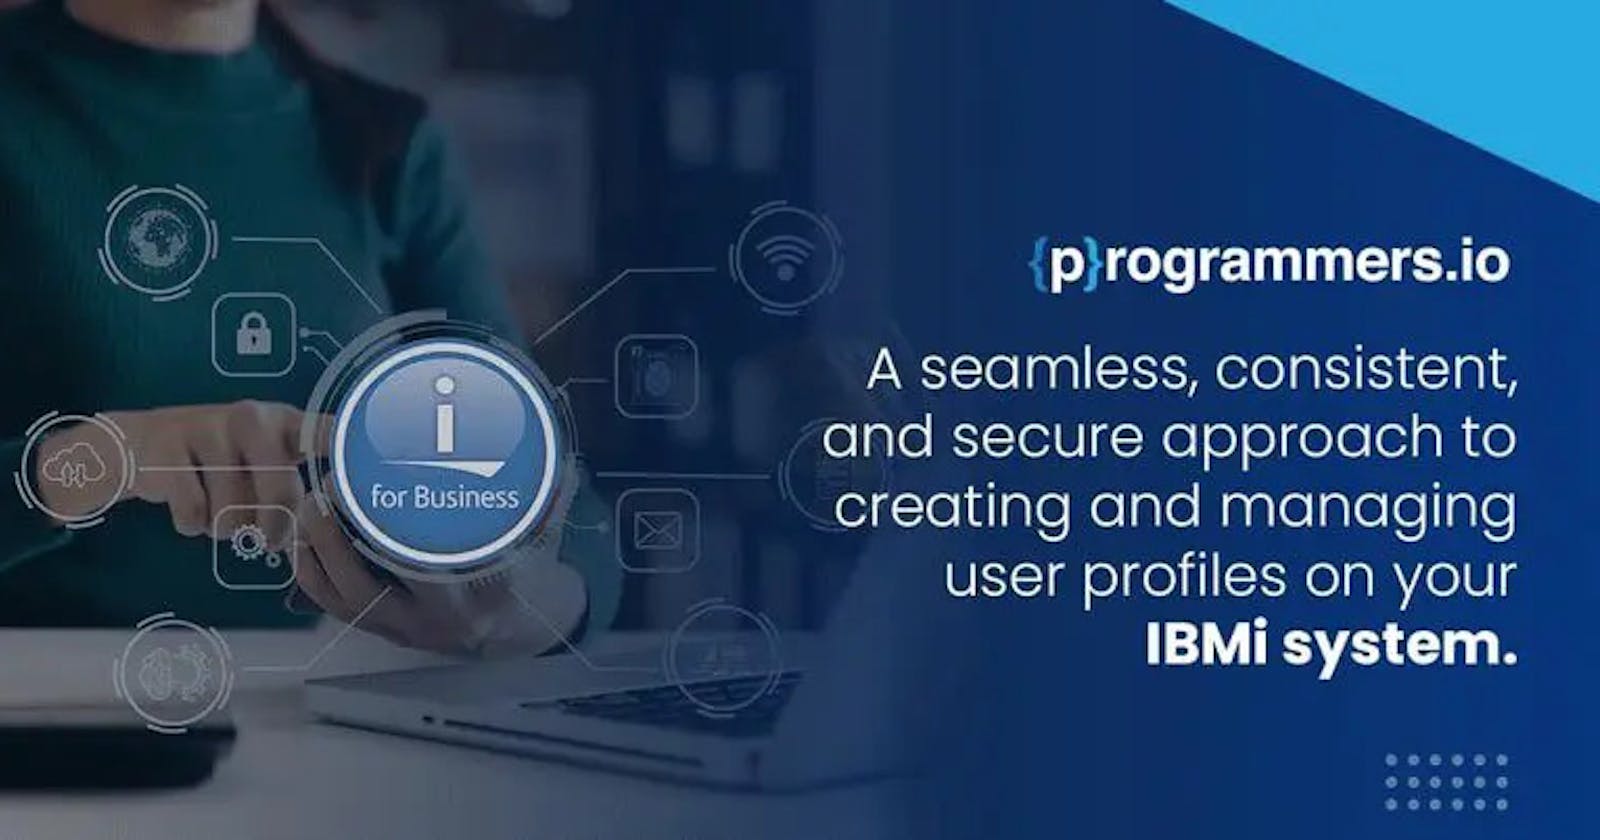 Profile Handles The unexplored features of IBMi